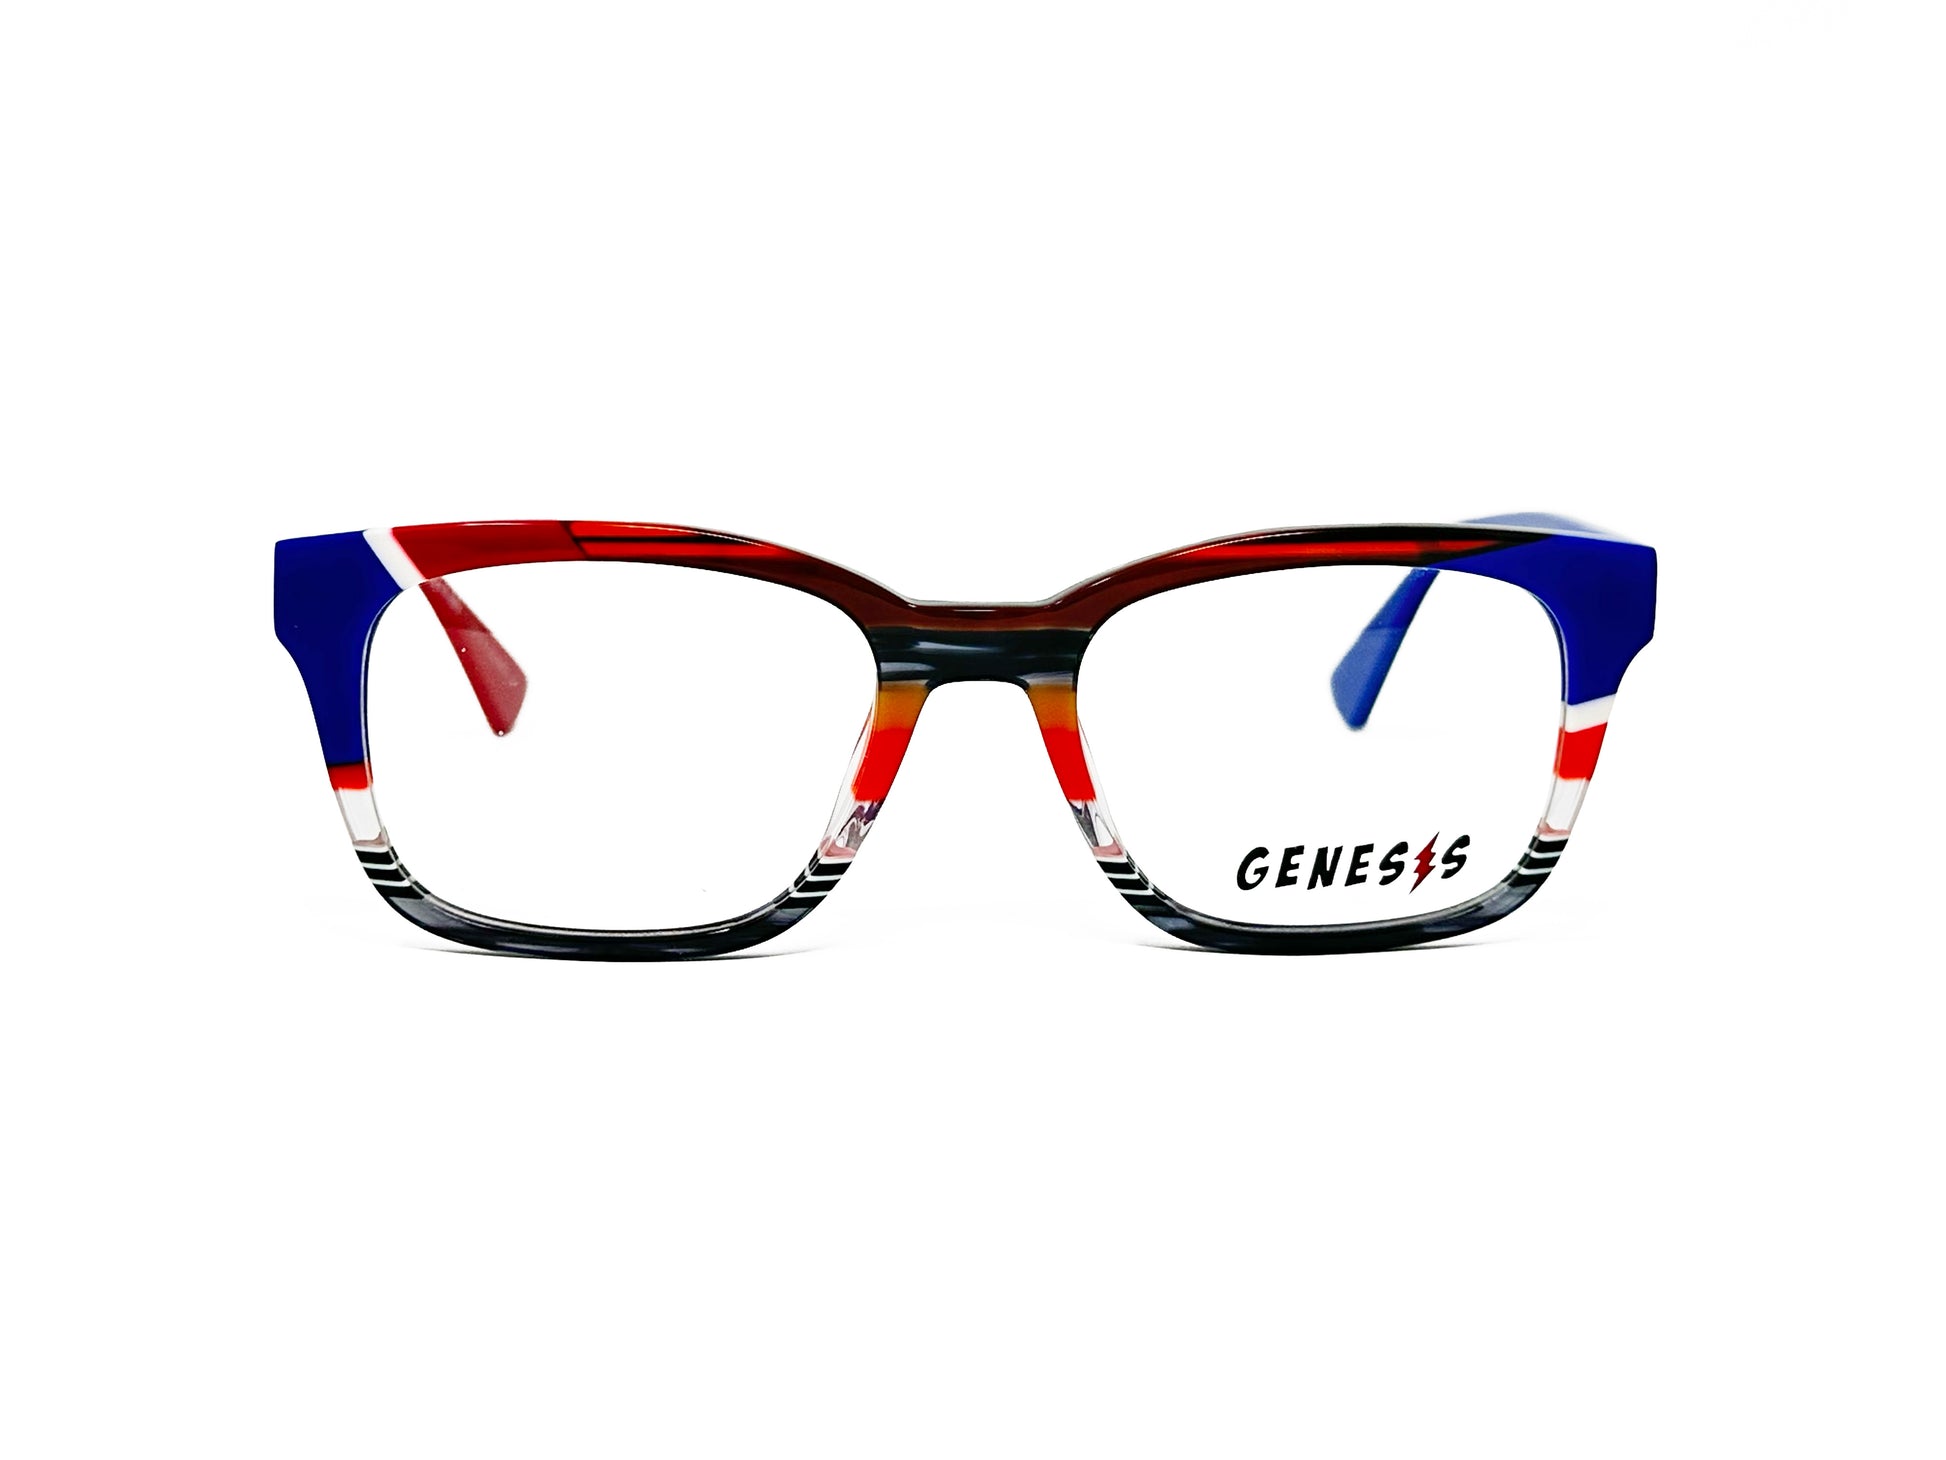 Genesis rectangular, acetate optical frame. Model: GV1524. Color: 6 - Red, blue, and transparent striping. Front view. 